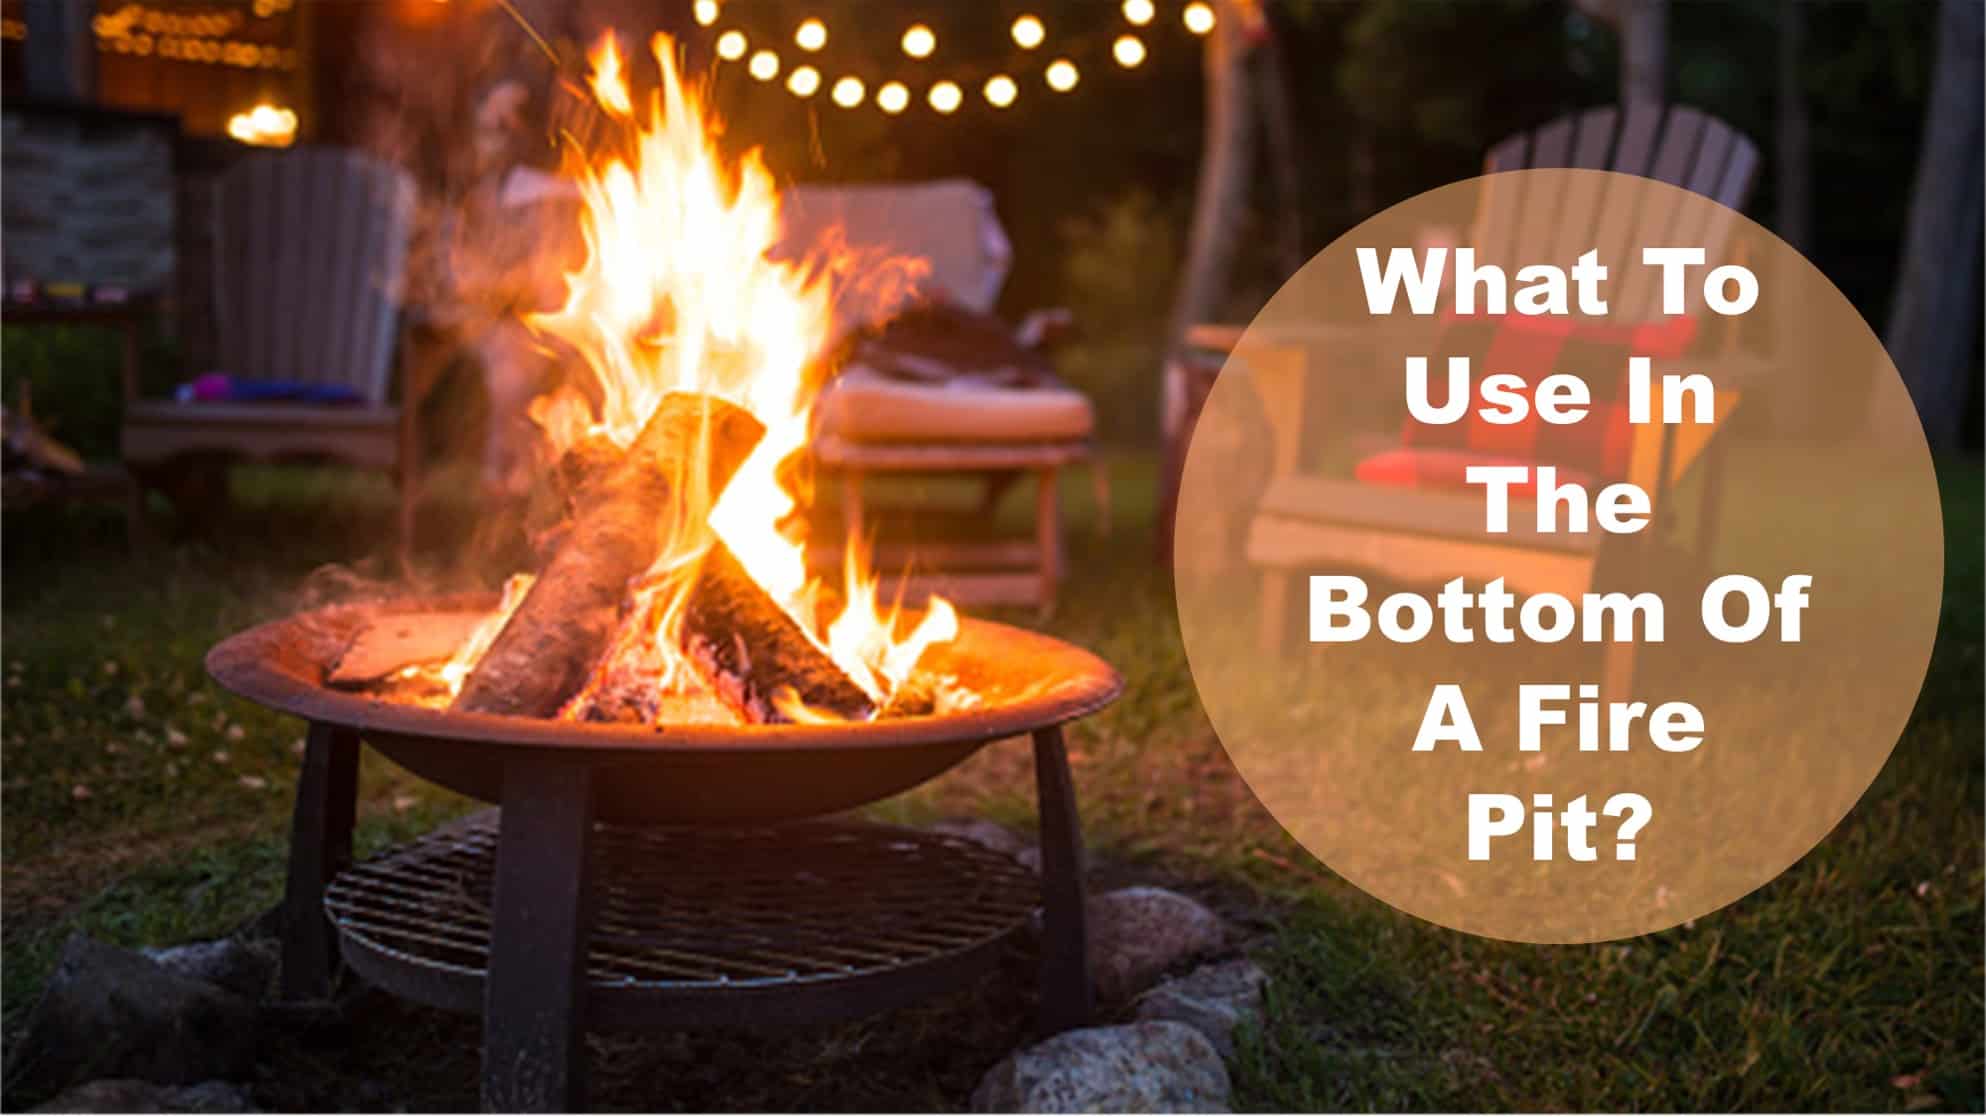 What To Use In The Bottom Of A Fire Pit, Best Material For Fire Pit